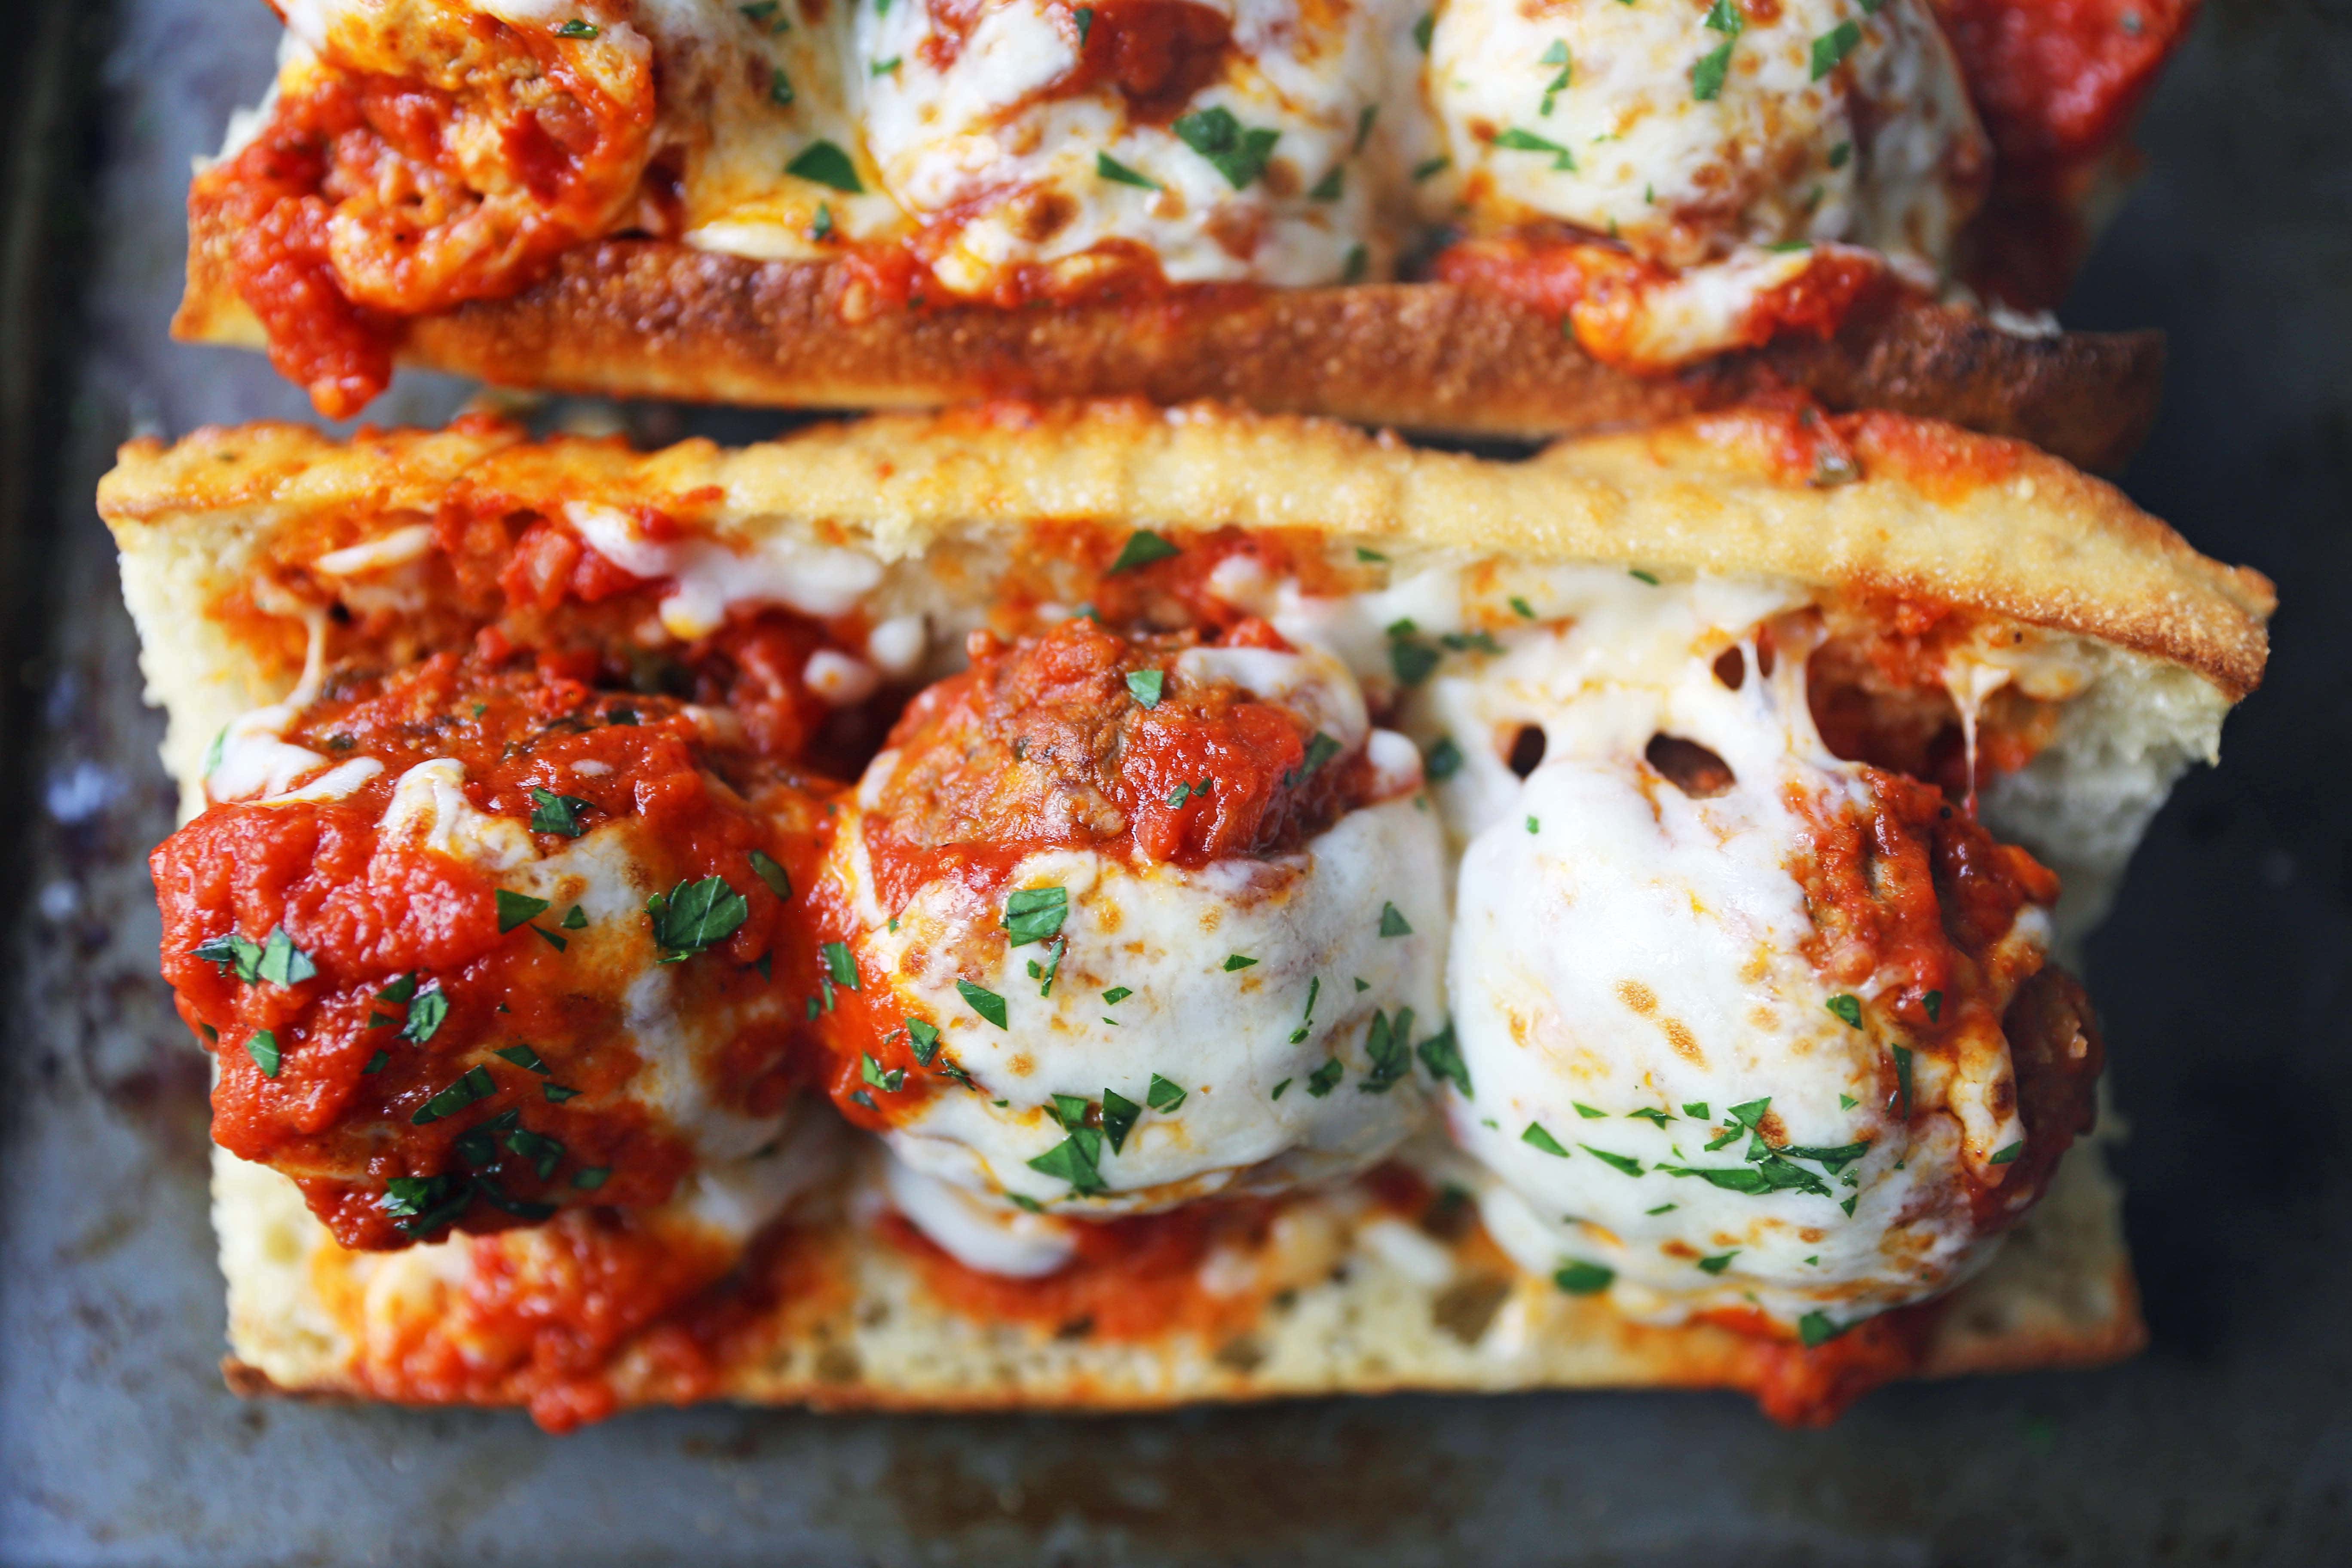 Italian Meatball Subs. Homemade beef parmesan meatballs in a fresh marinara sauce topped with melted mozzarella cheese all on toasted bread. The best meatball sub recipe! www.modernhoney.com #meatballs #meatball #meatballsub